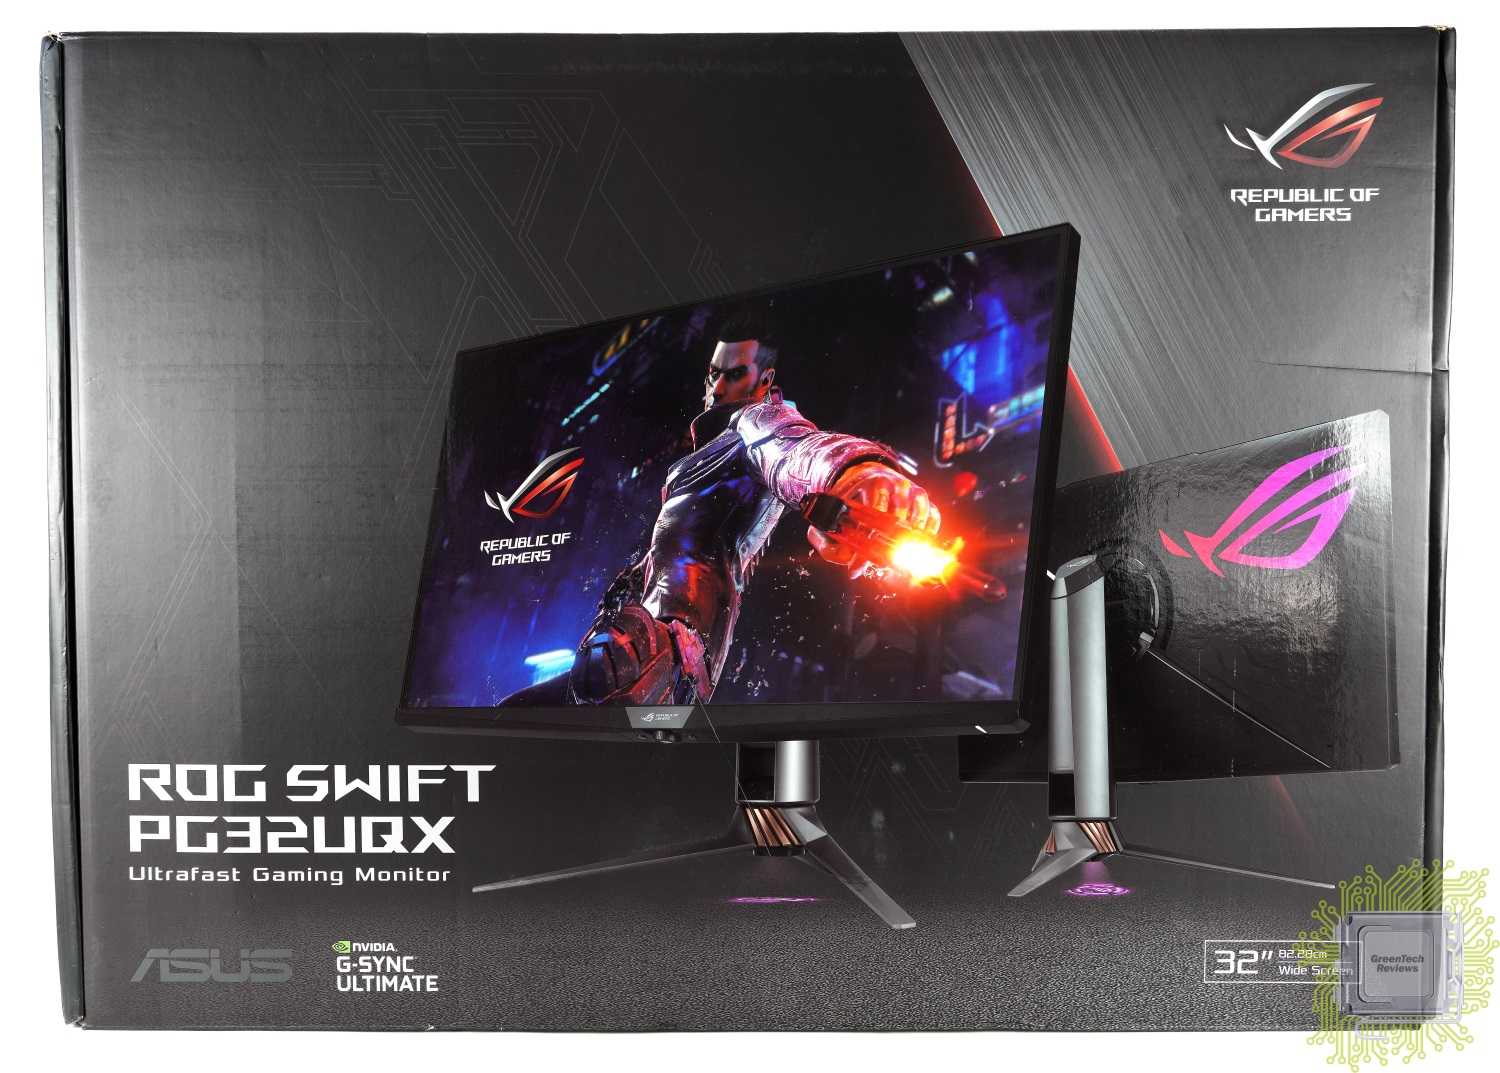 Asus pg279q gaming monitor review: one of the most popular current high-end gaming monitors on the market with more than average ips glow and backlight bleed issues.